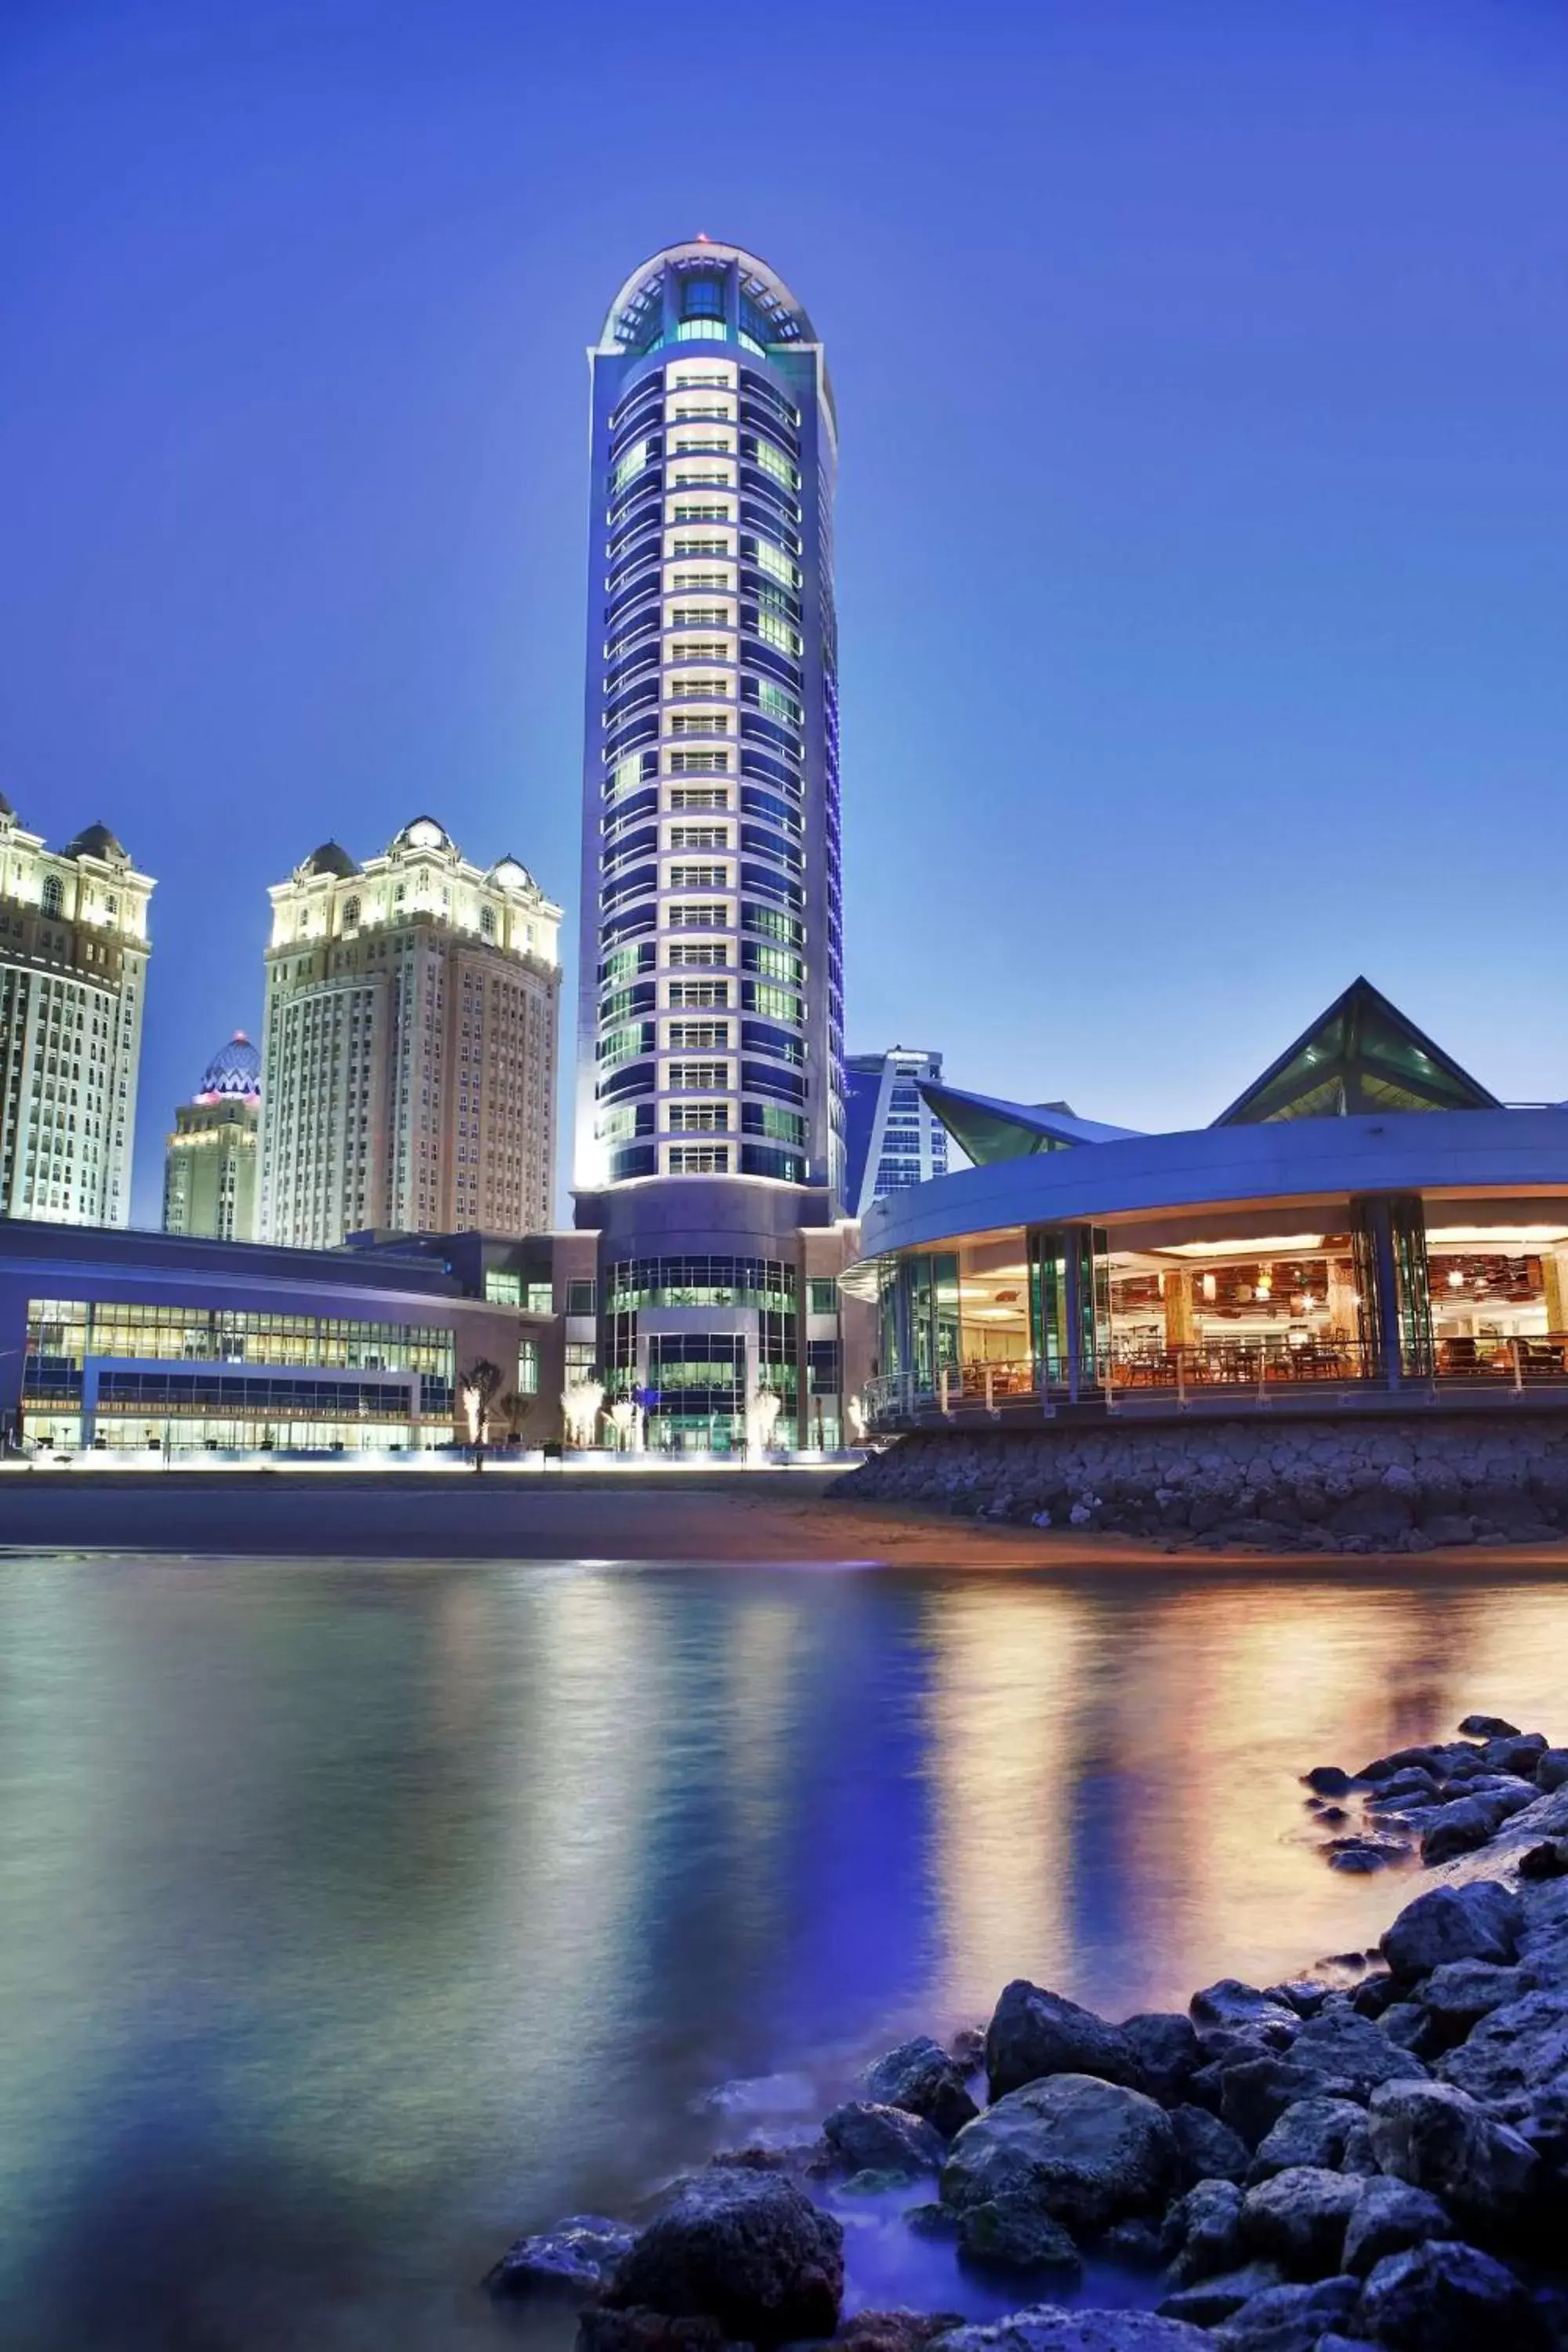 Property building in Hilton Doha